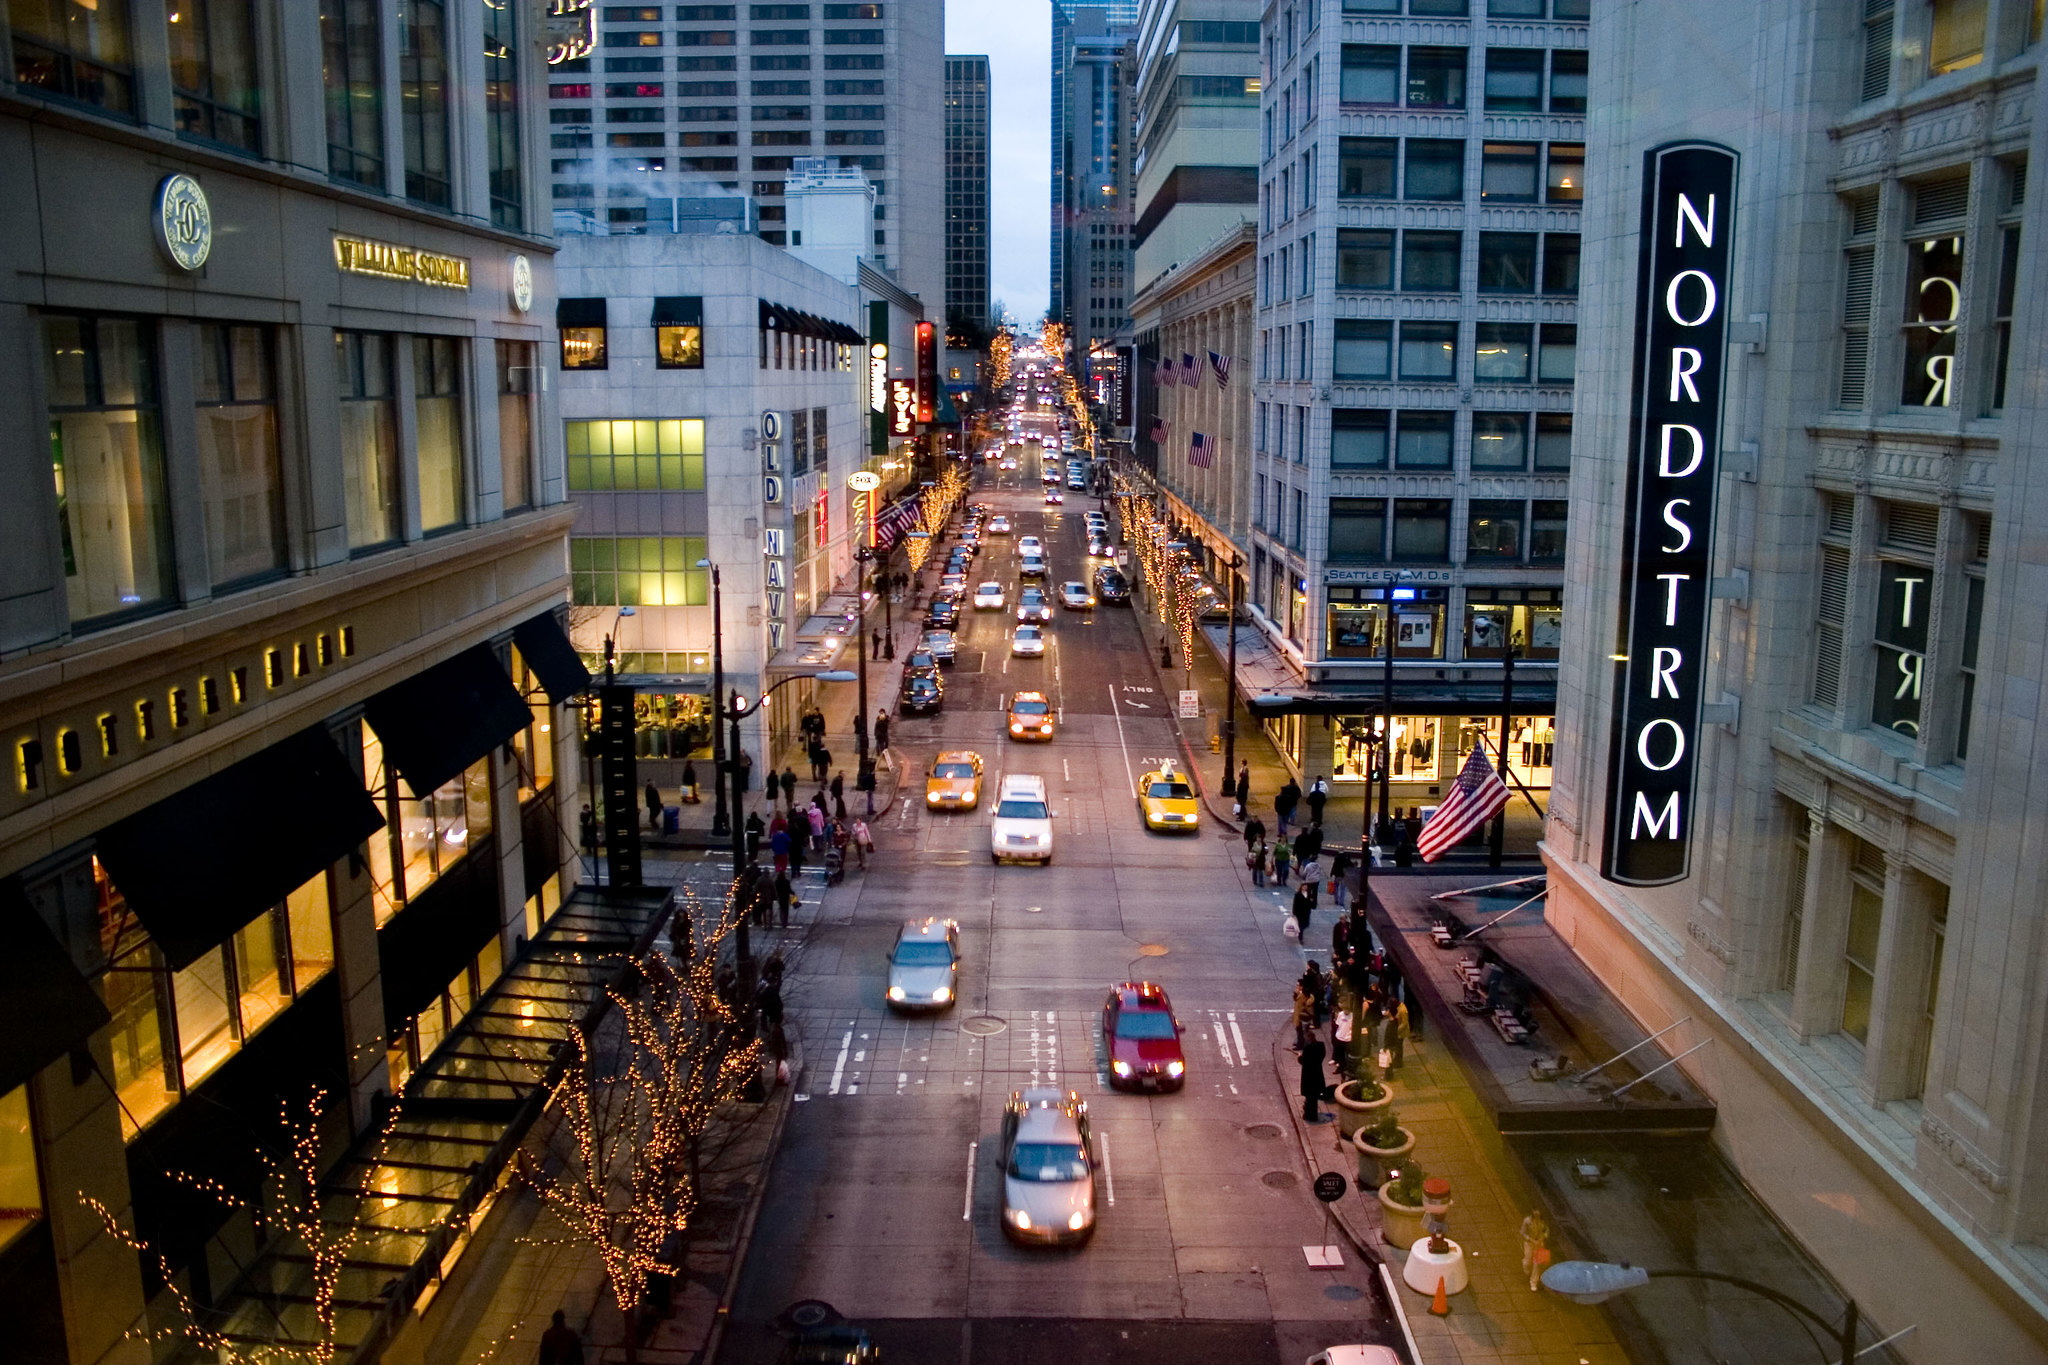 KUOW - In the era of , what's a Nordstrom to do?